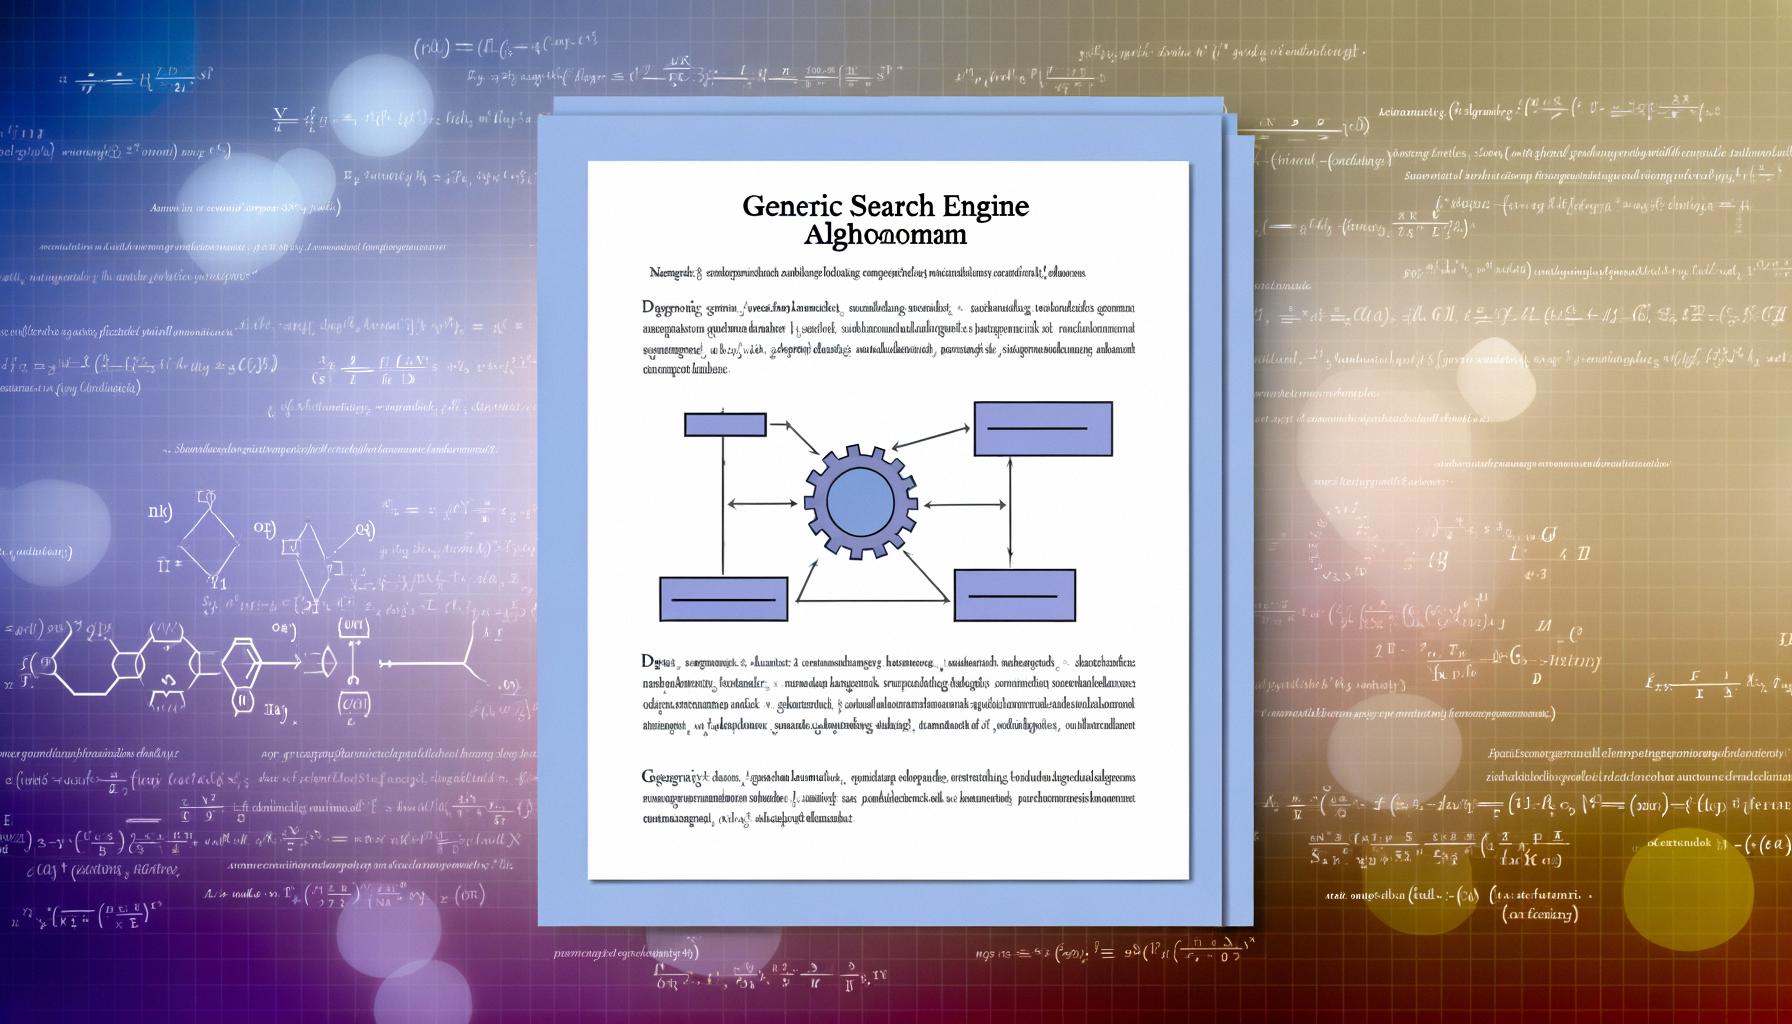 Google's internal search algorithm details were leaked online, causing SEO controversy.